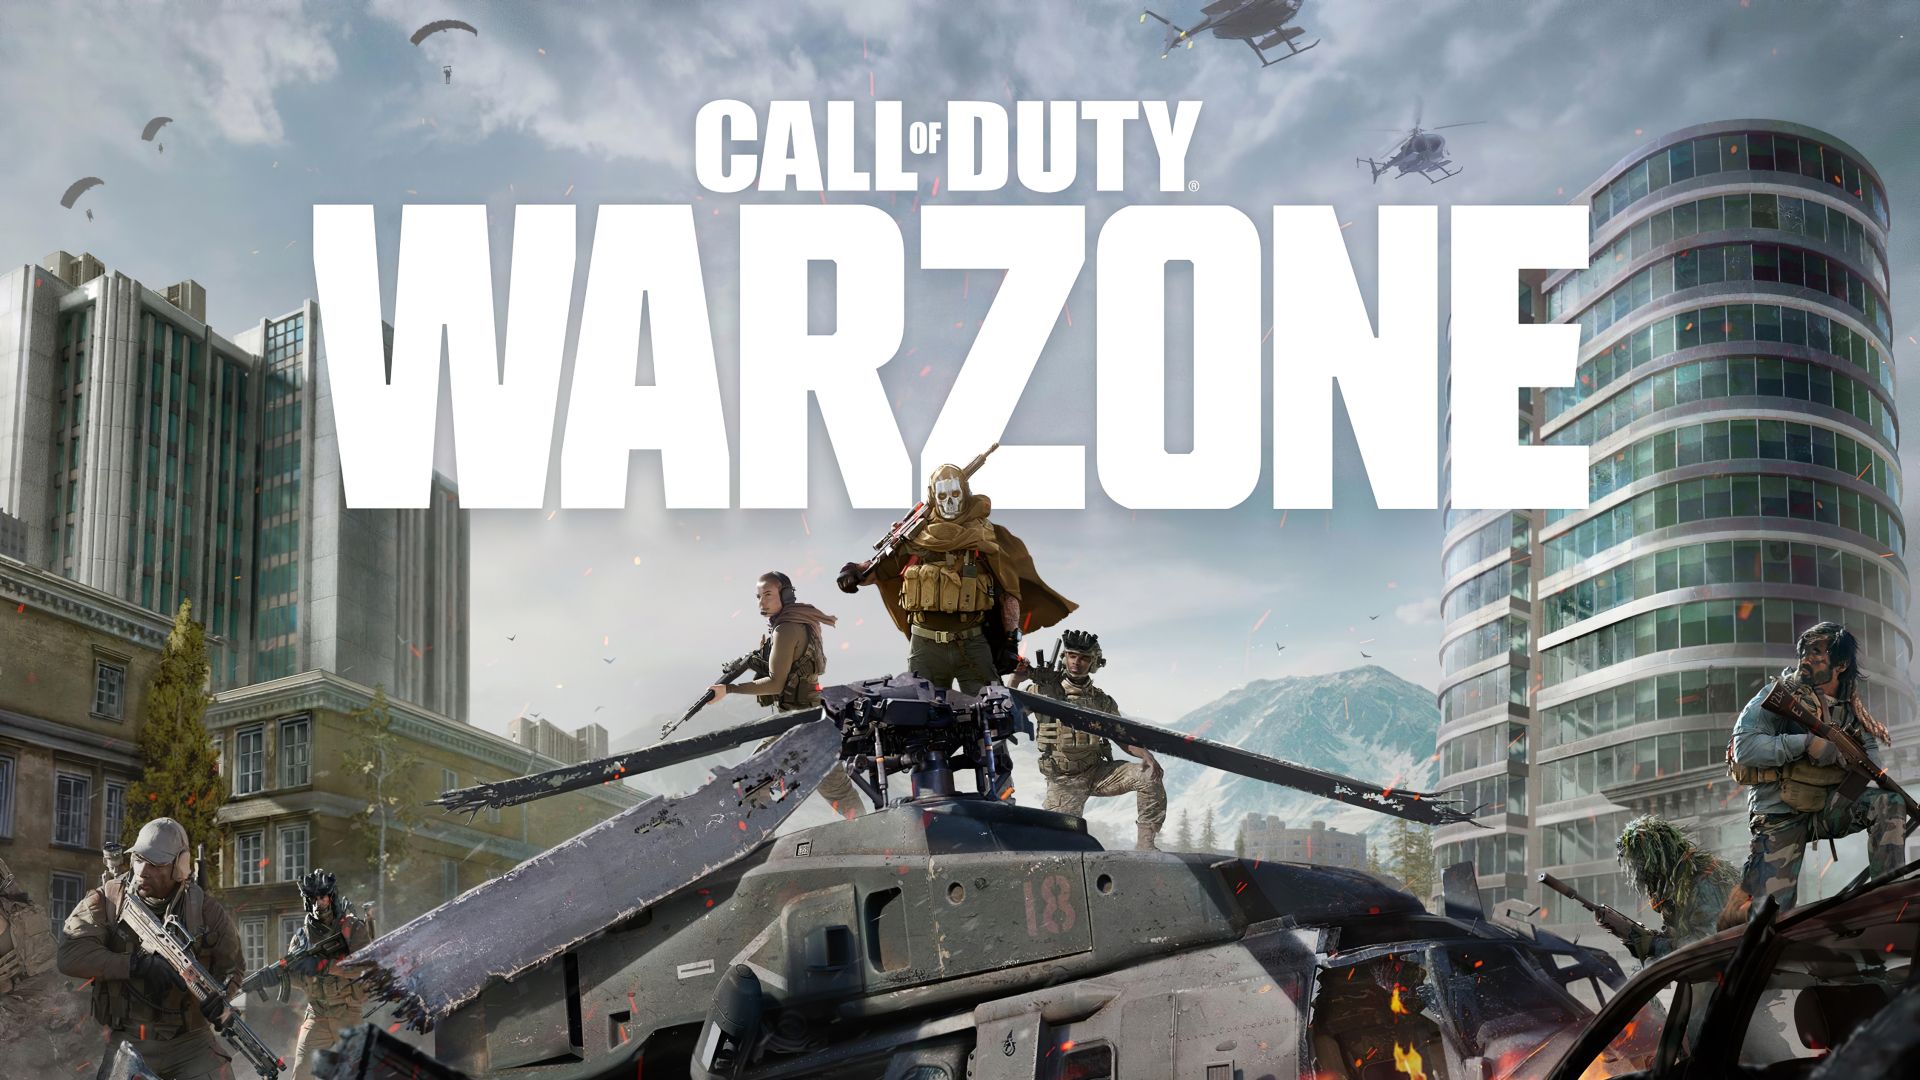 Call of Duty: Warzone Wallpaper